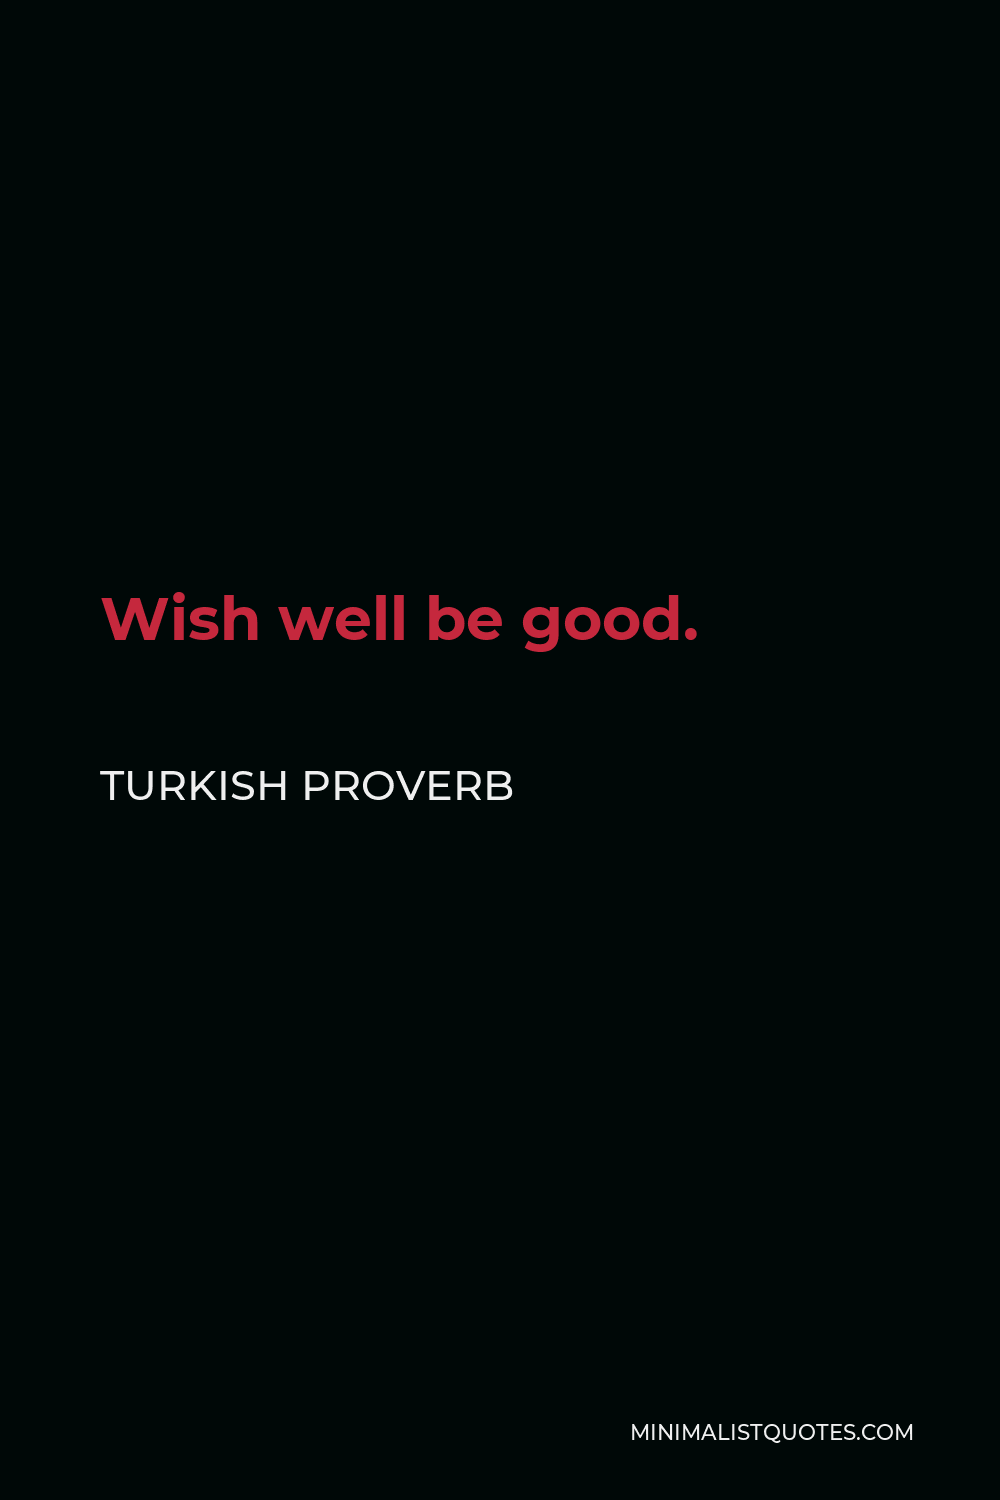 Turkish Proverb Quote - Wish well be good.